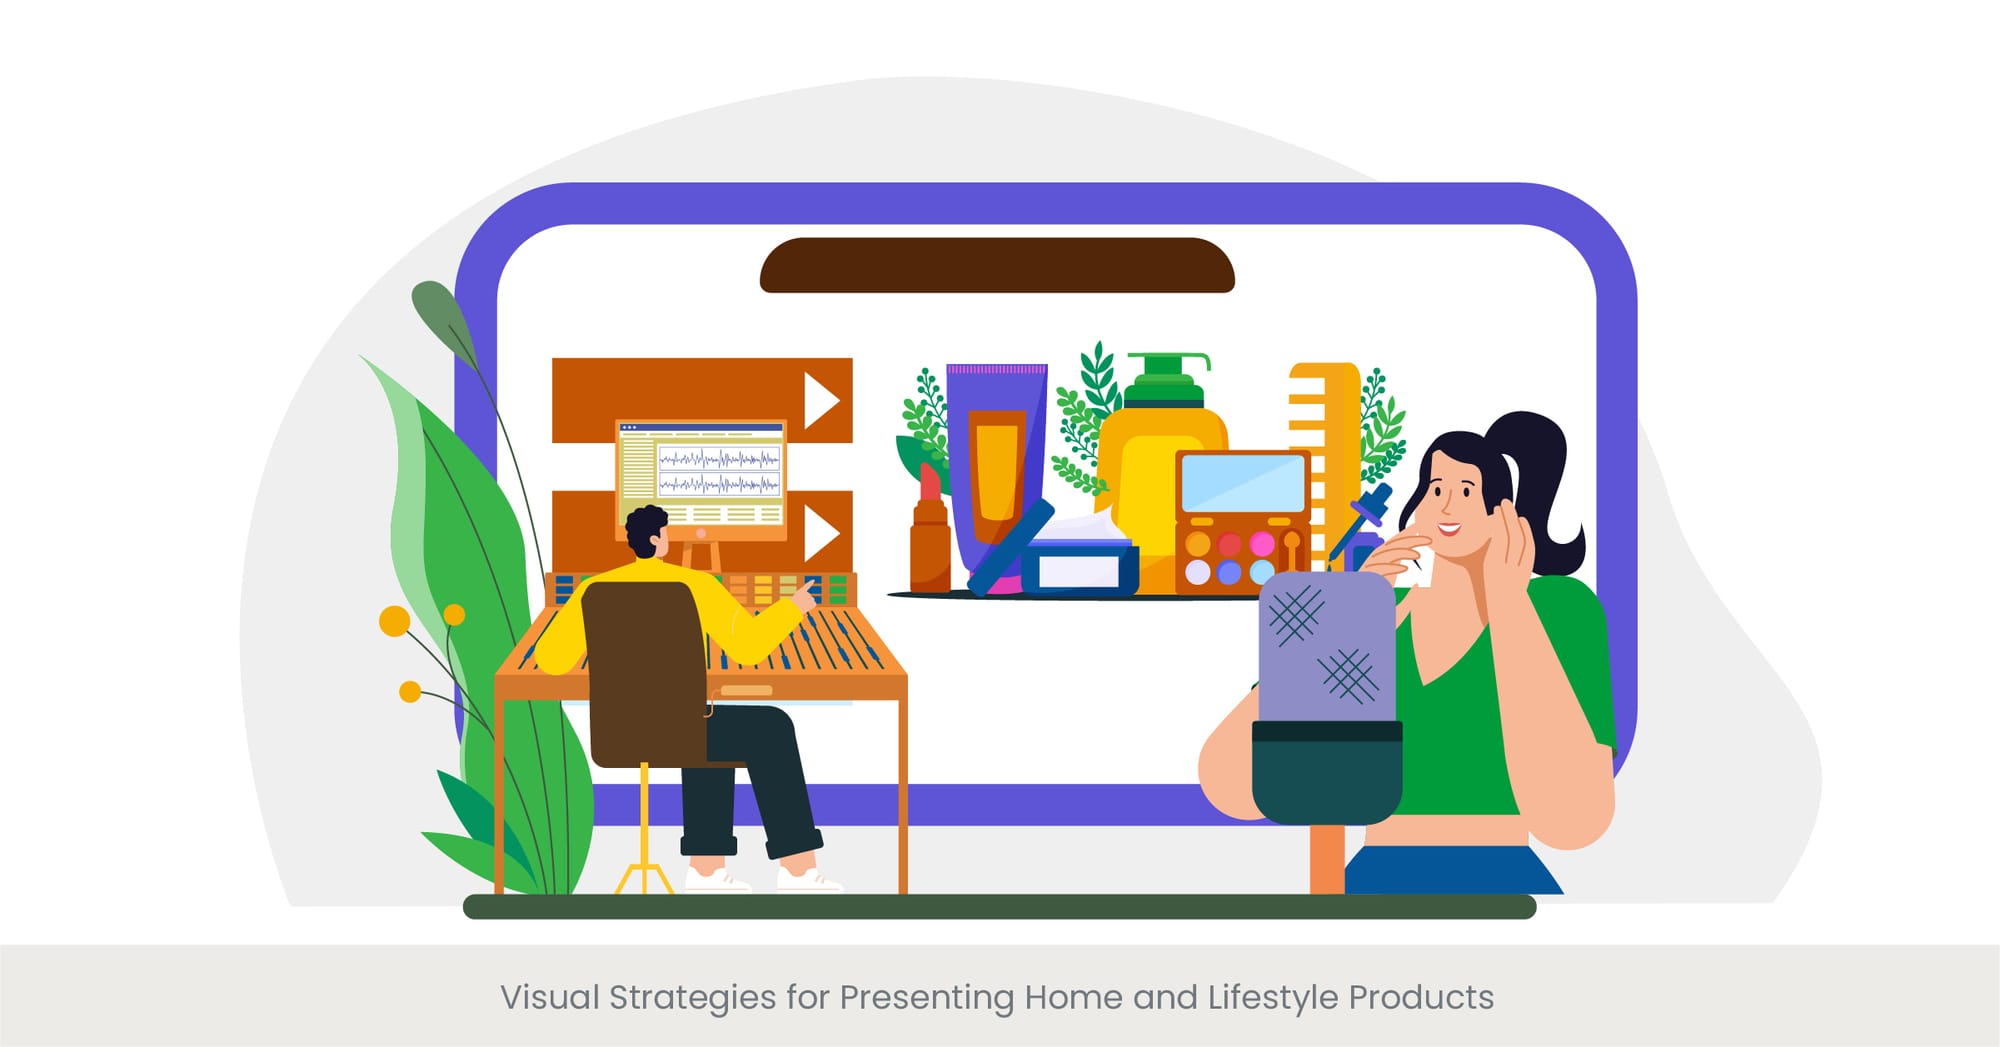 Visual Strategies for Presenting Home and Lifestyle Products